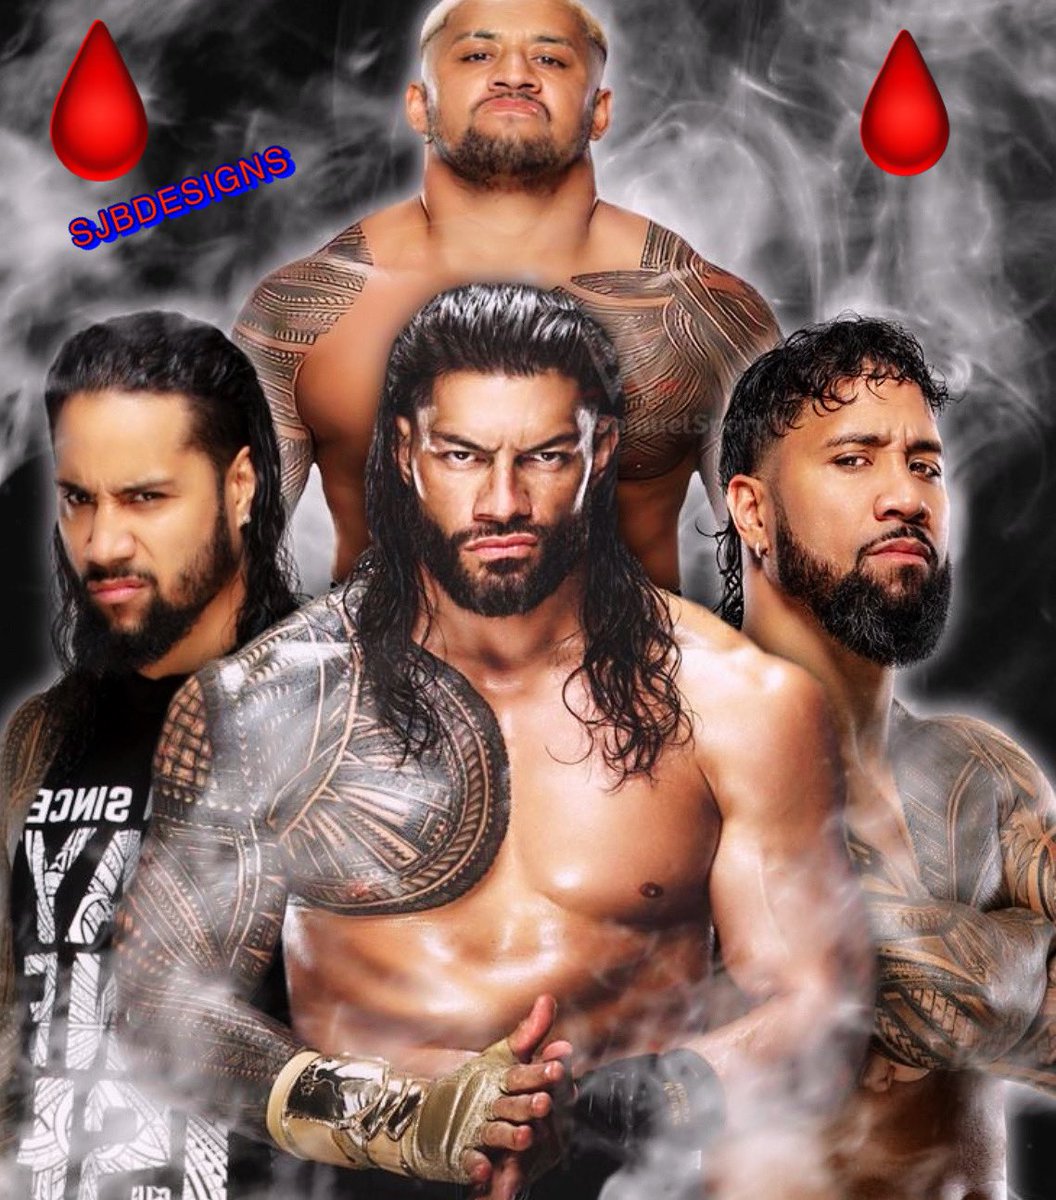 #FridayMotivation #RomanReigns #Smackdown 
914 + 333 Days🏆on his #IslandOfRelevancy he’s in #GODMode #TribalChief #TheBloodline🩸prayers for resolution!
BUT I stand with @WWERomanReigns on it all! I’m #RomanEmpire 🌎it’s what #WeTheOnes do‼️#GOAT𓃵 #UnifiedChampion 
☝🏽🏆🏝️KING👑